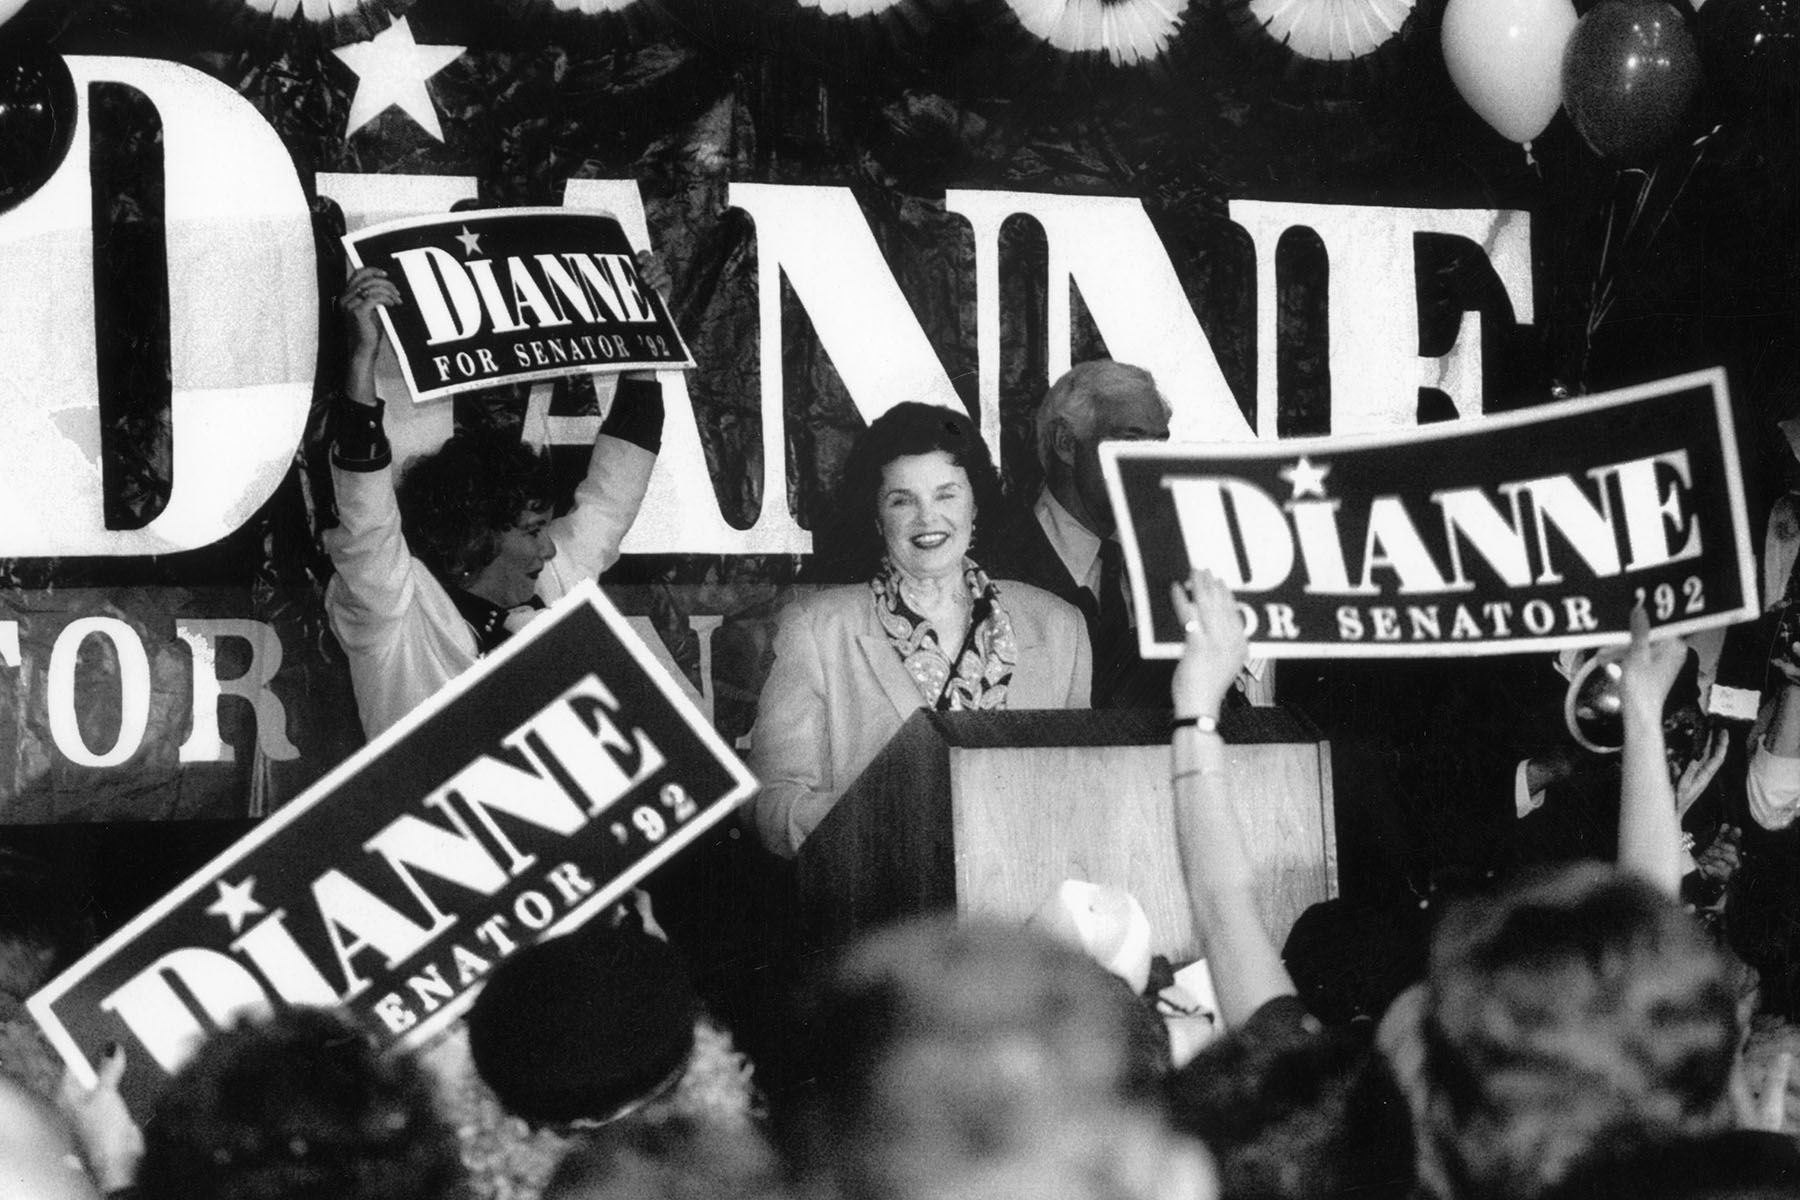 Dianne Feinstein, surrounded by supporters, celebrates her primary win in 1992.